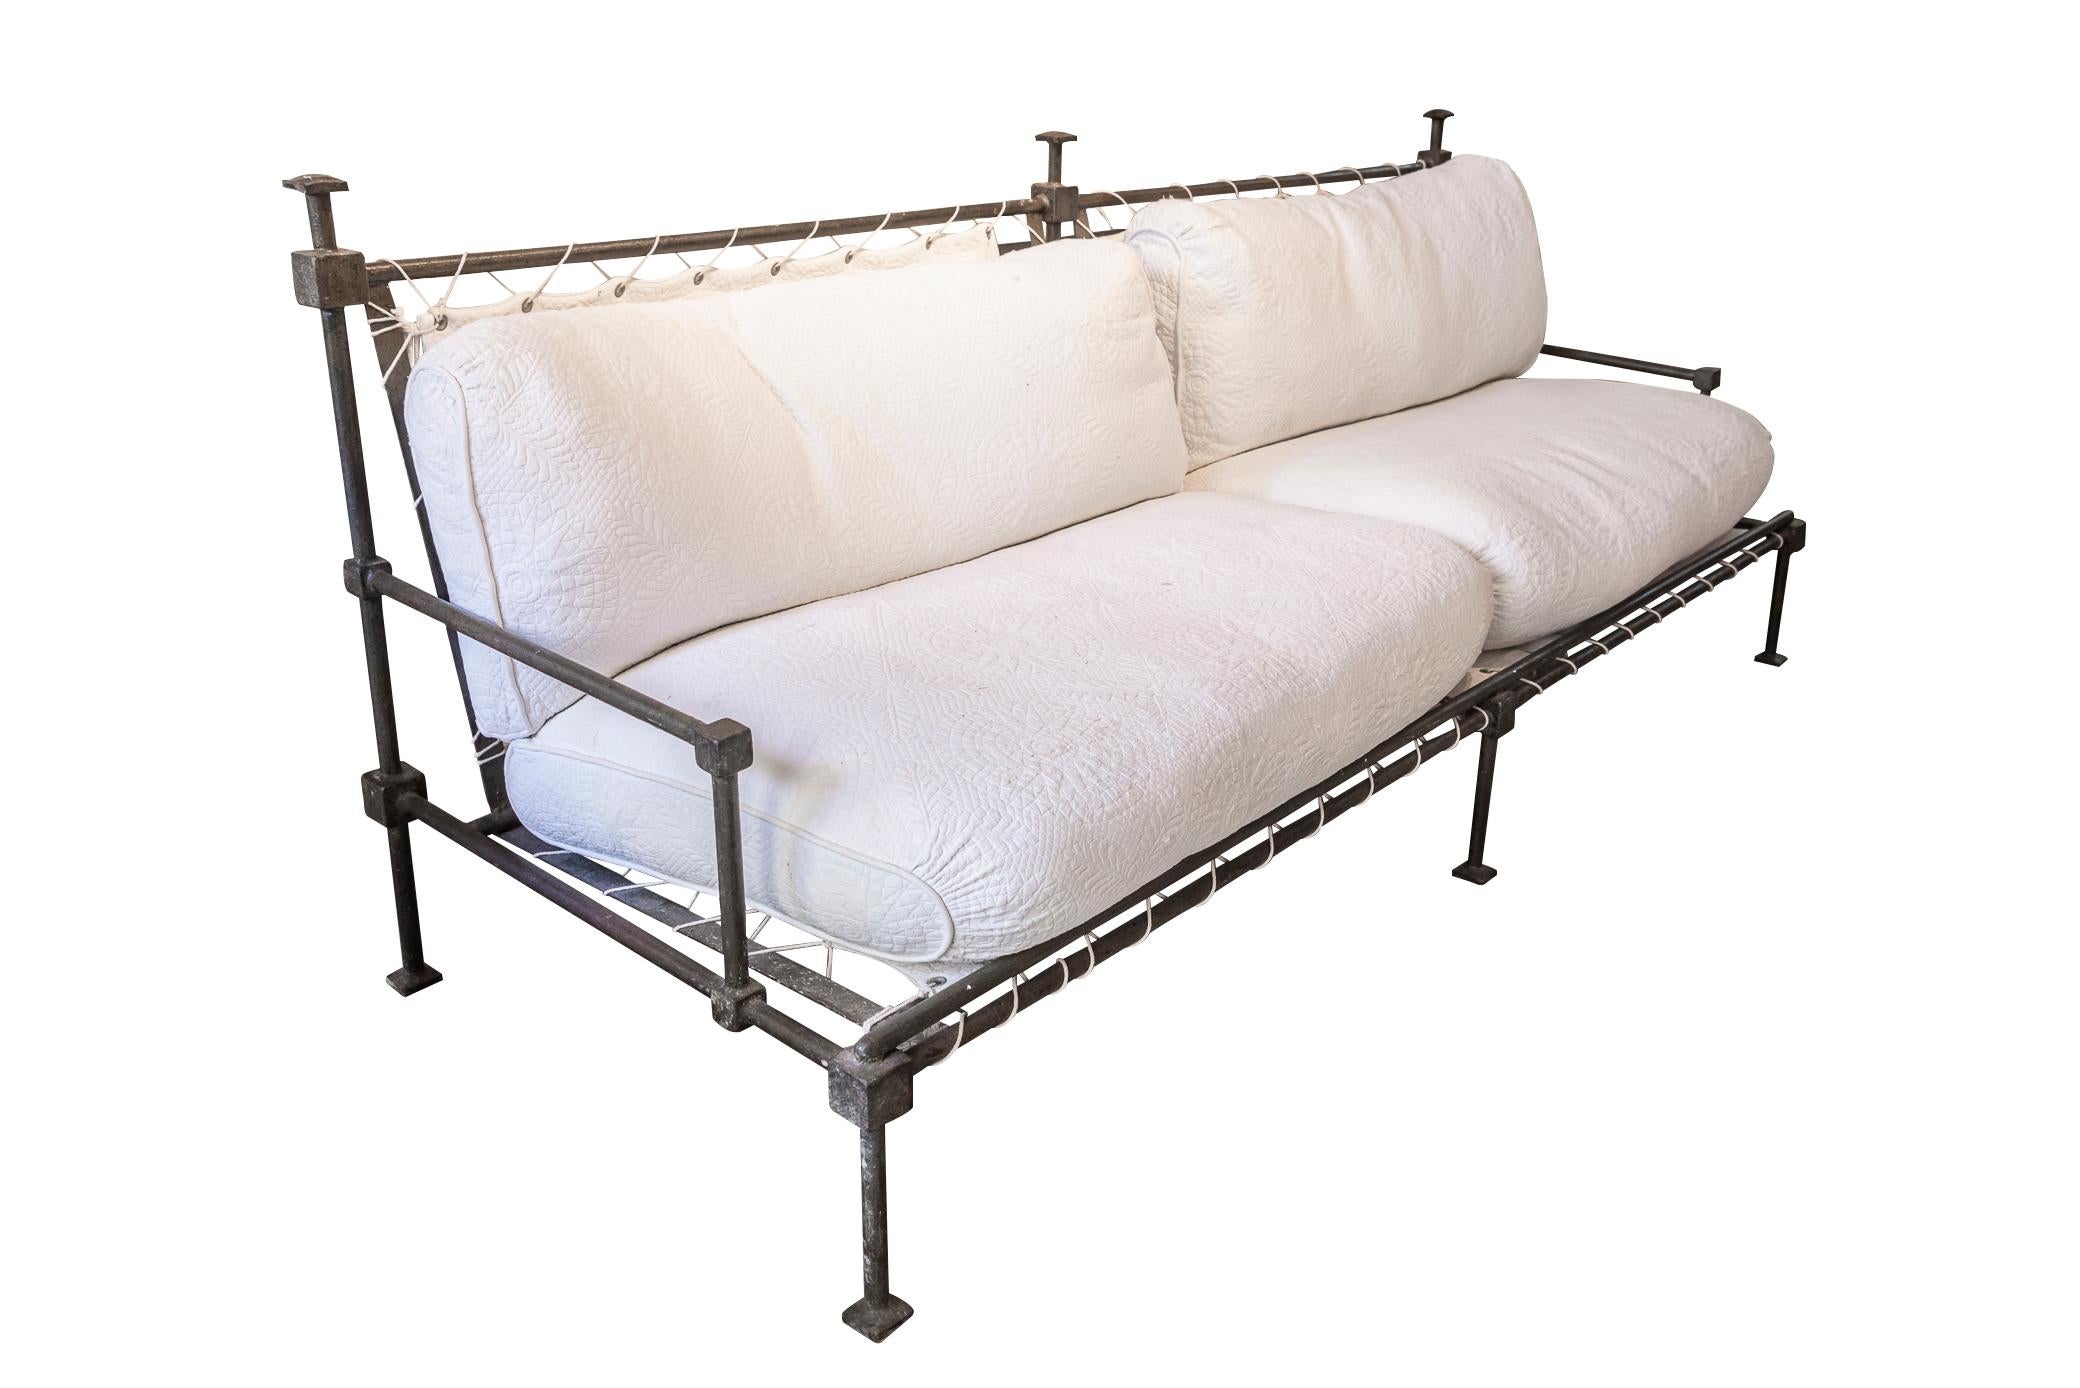 Francine Schwab (1935-2020), 
Neo-classical sofa, 
white iron structure, 
patina in the style of the Antics, 
with and original fabric to be redone.
(wear and stains on the fabric).
Measures: 213 x 80 x 89 cm.

Francine Schwab moved to the Côte